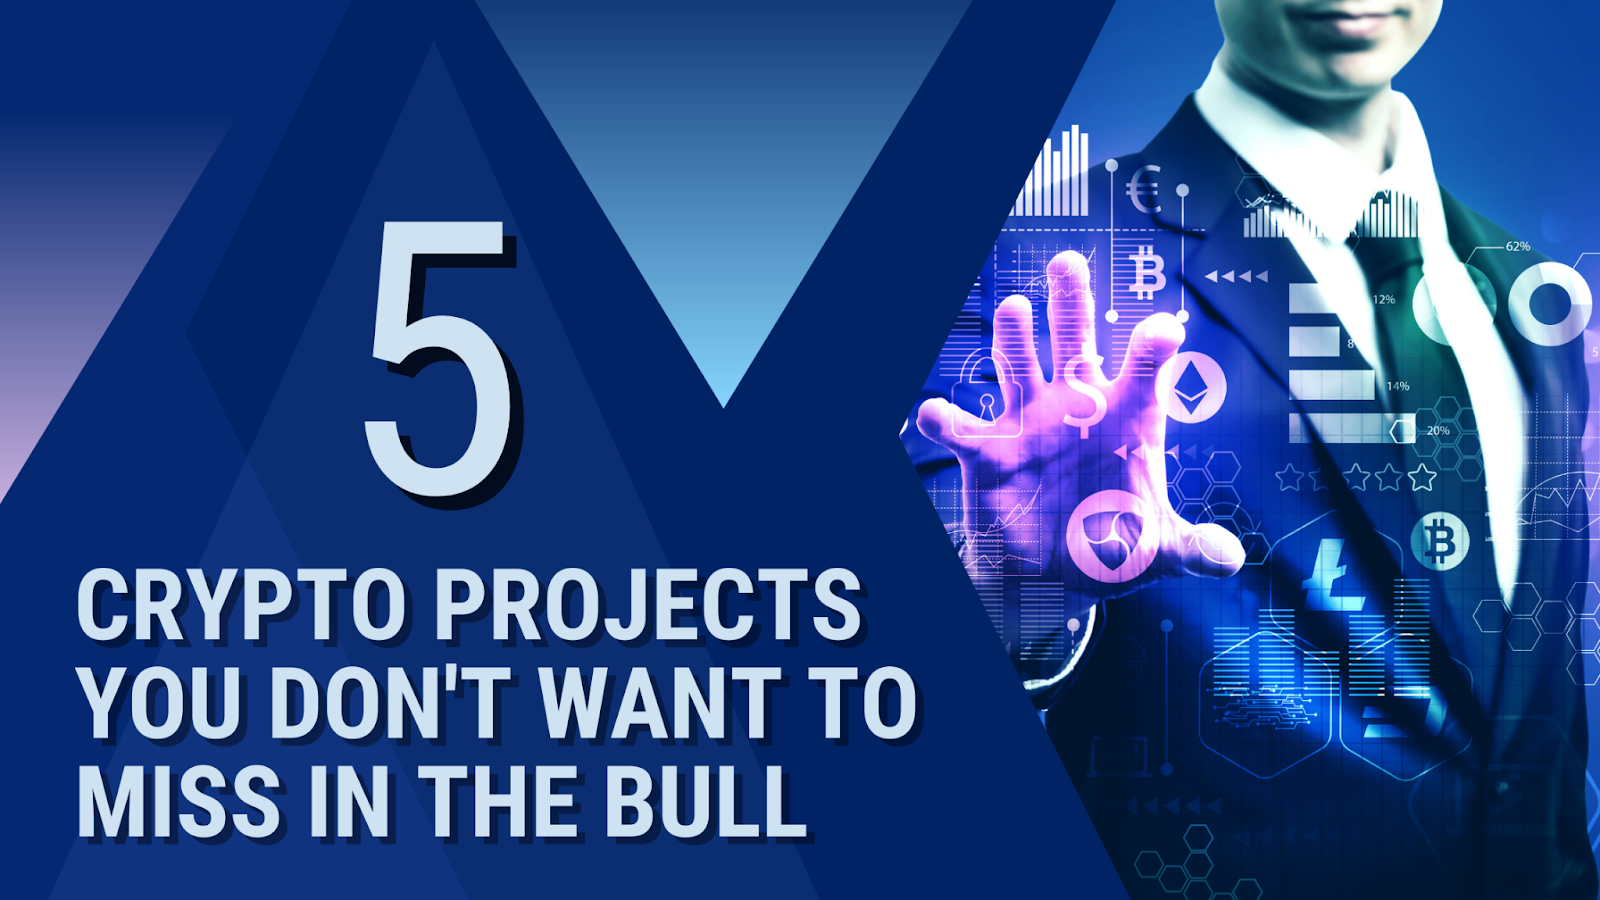 The 5 Crypto Projects you don’t want to miss in the next bull market